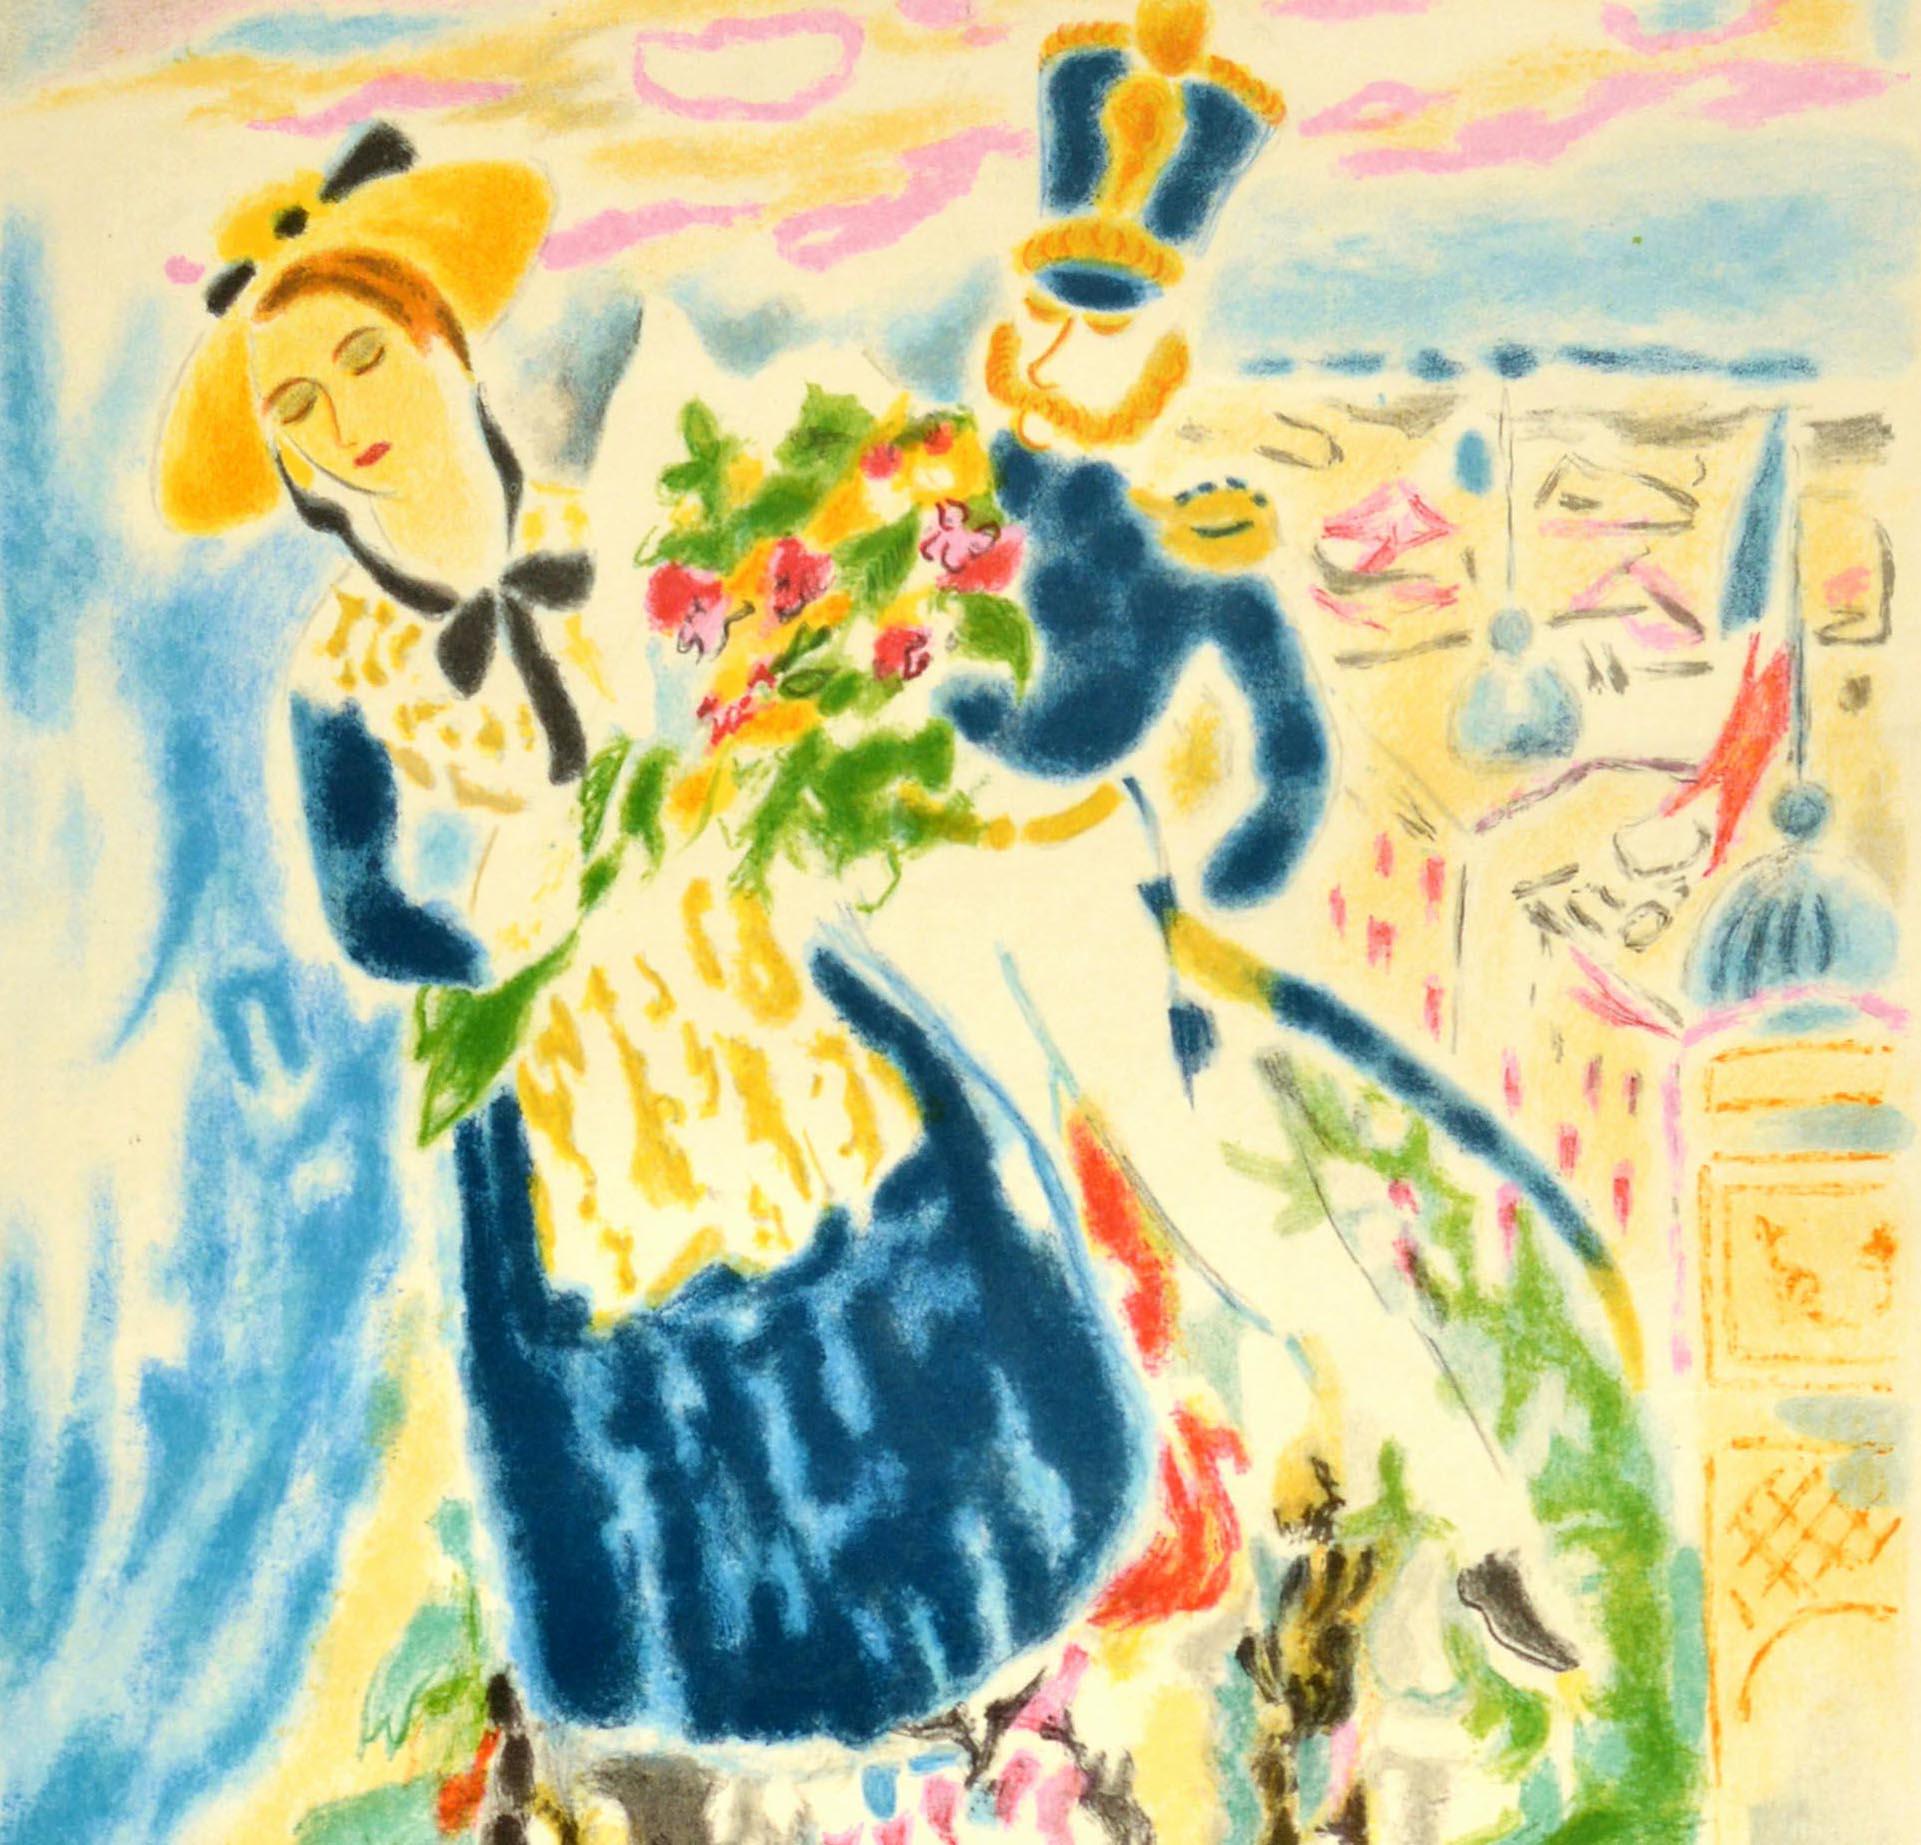 Original vintage travel poster for the Carnival of Nice / Le Carnaval a Nice from 28 January to 9 February 1967 featuring colourful artwork by the French painter Jules Cavailles (1901-1977) of a lady wearing traditional clothing with an apron and